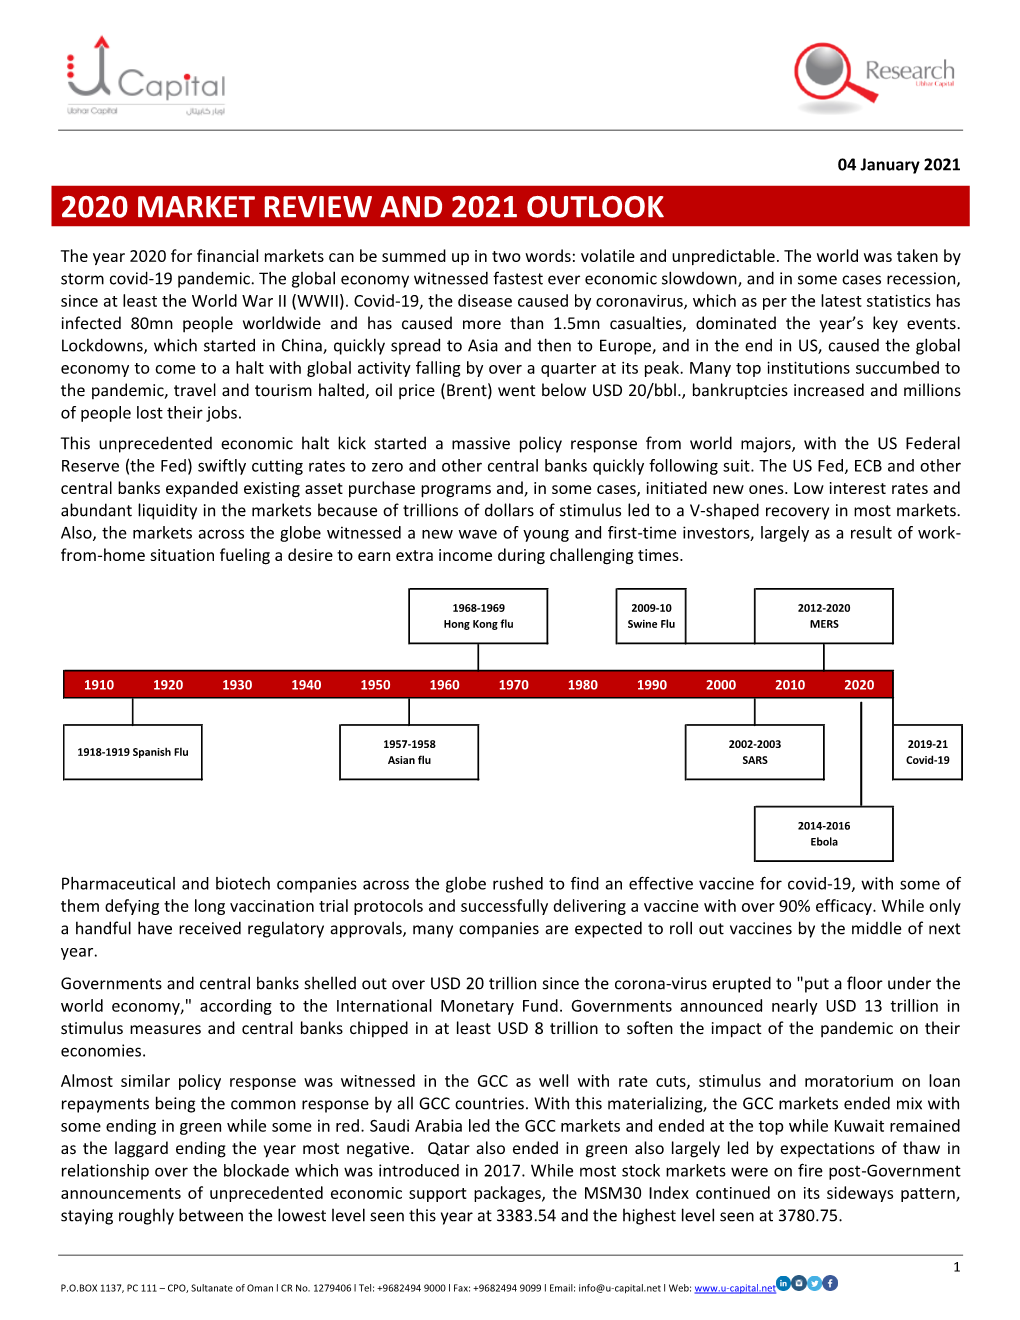 2020 Market Review and 2021 Outlook